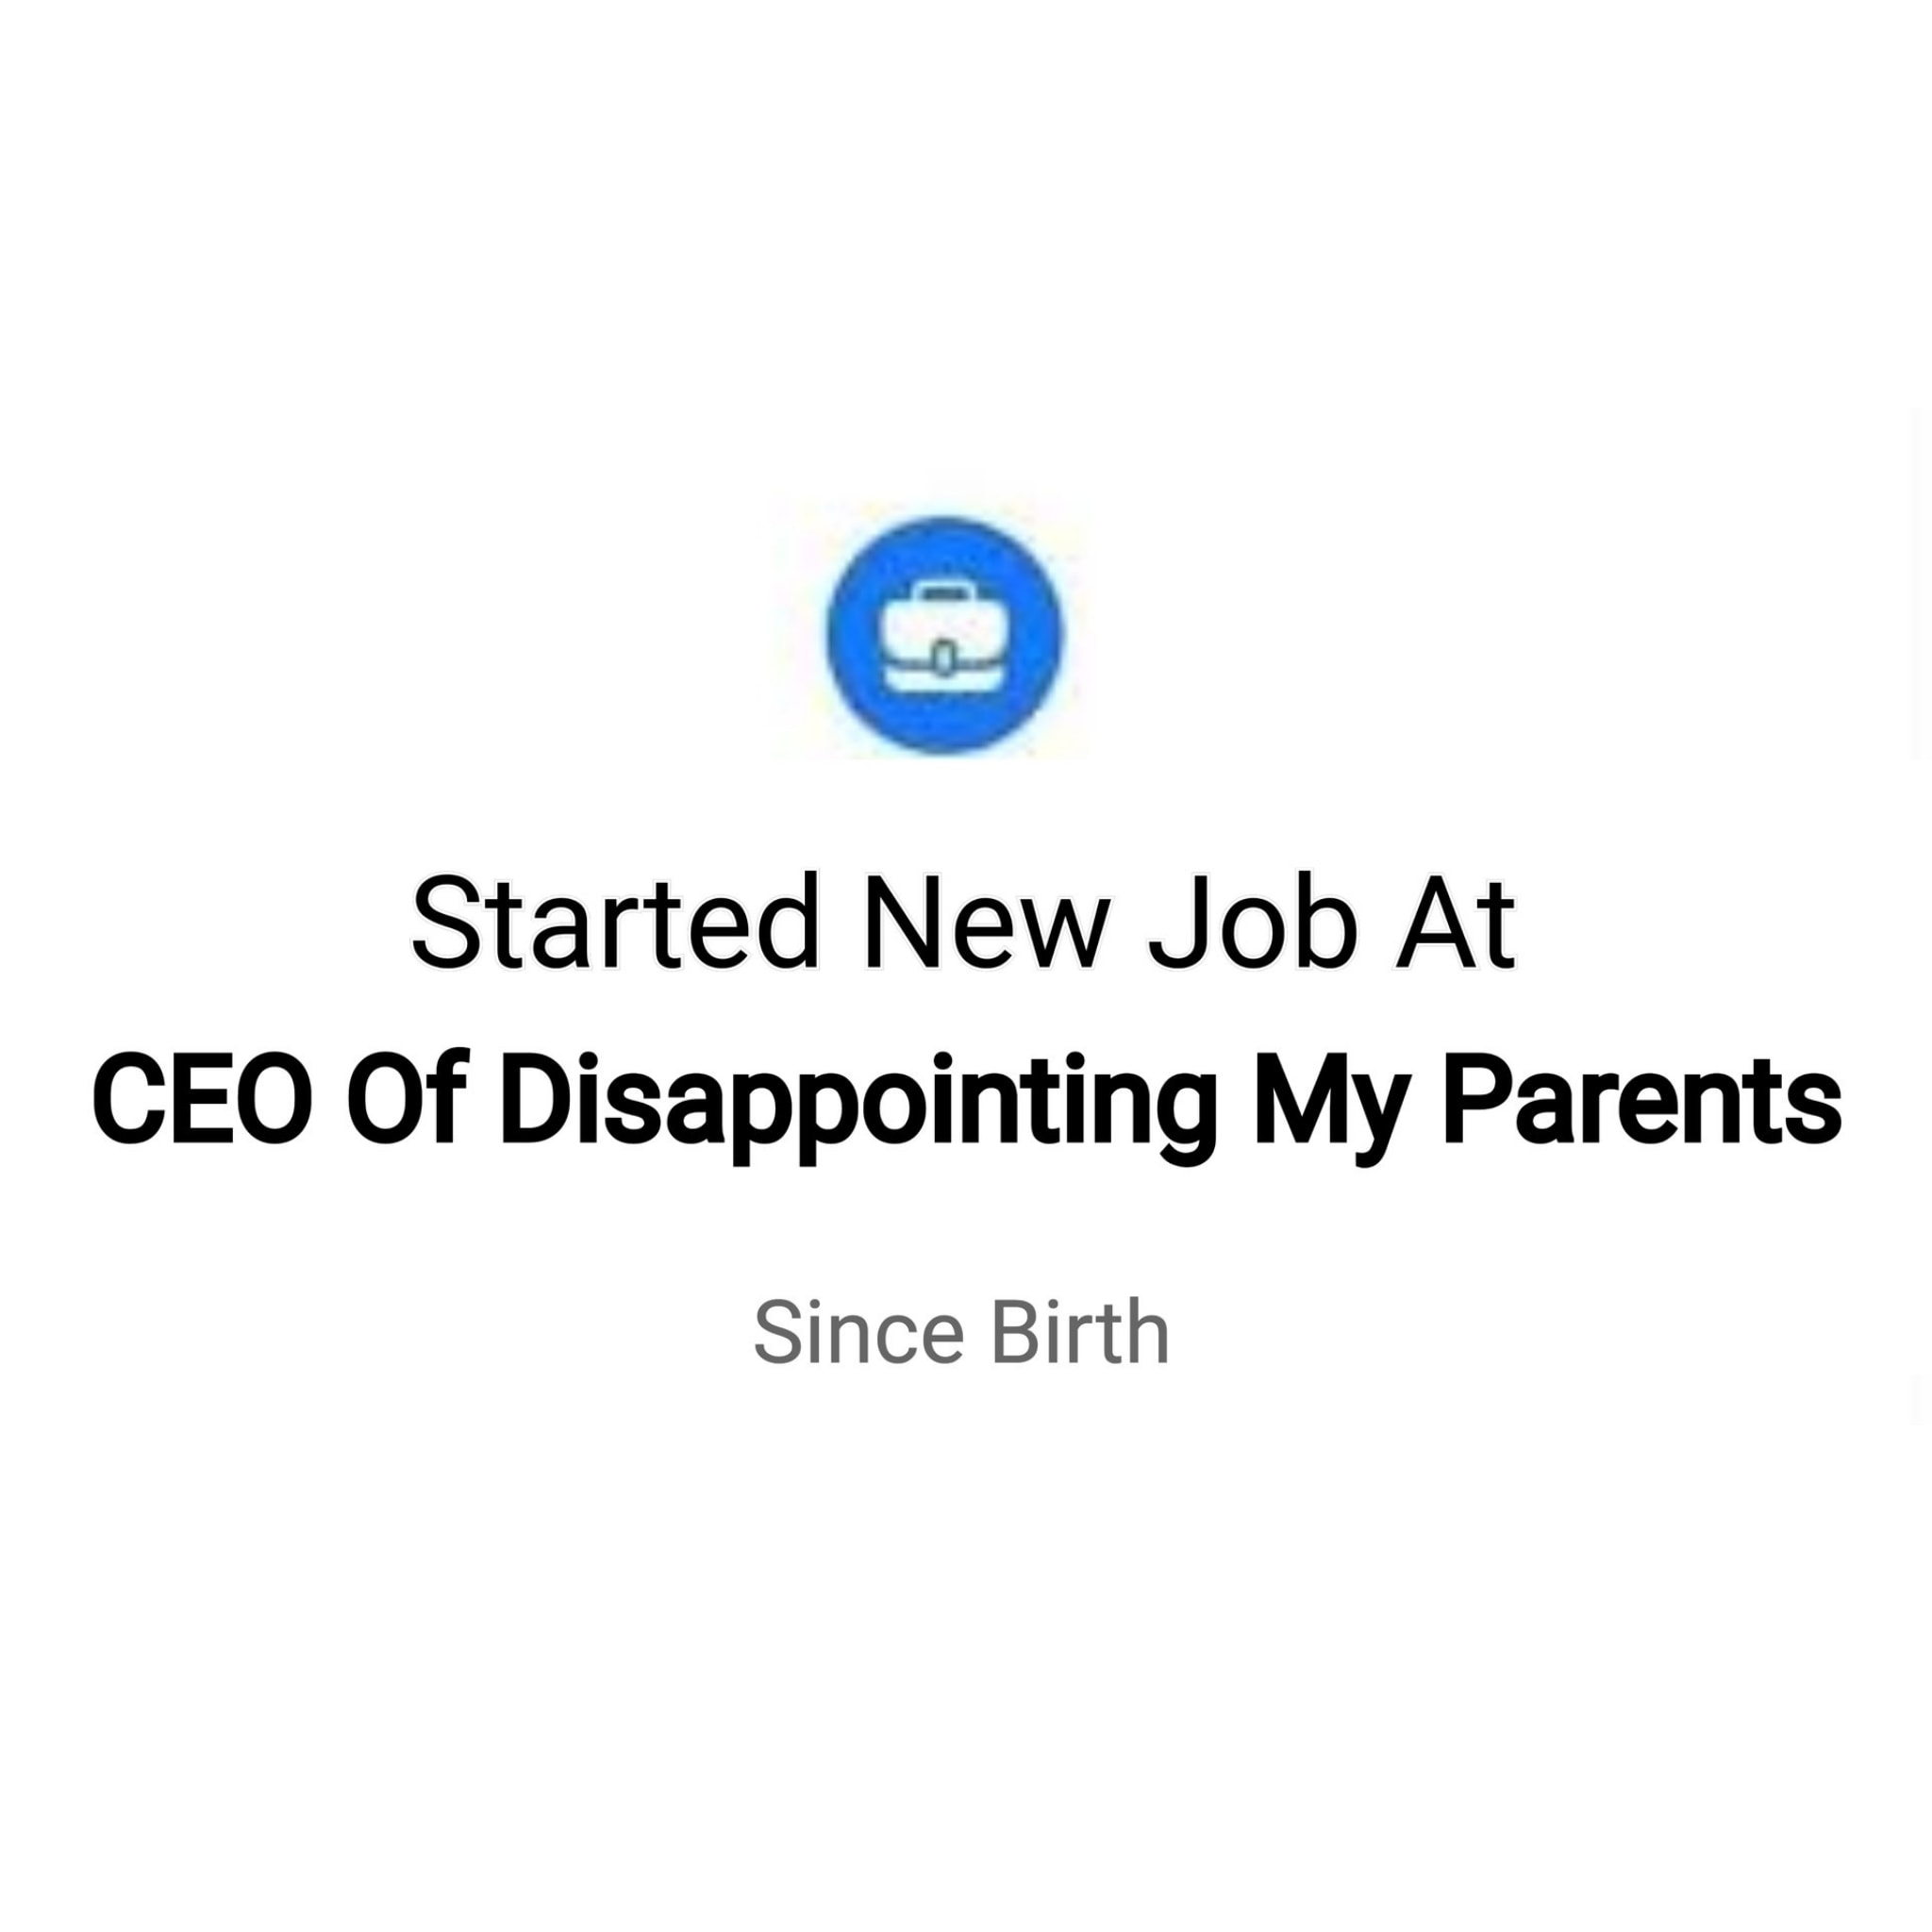 relatable memes - organization - Started New Job At Ceo Of Disappointing My Parents Since Birth